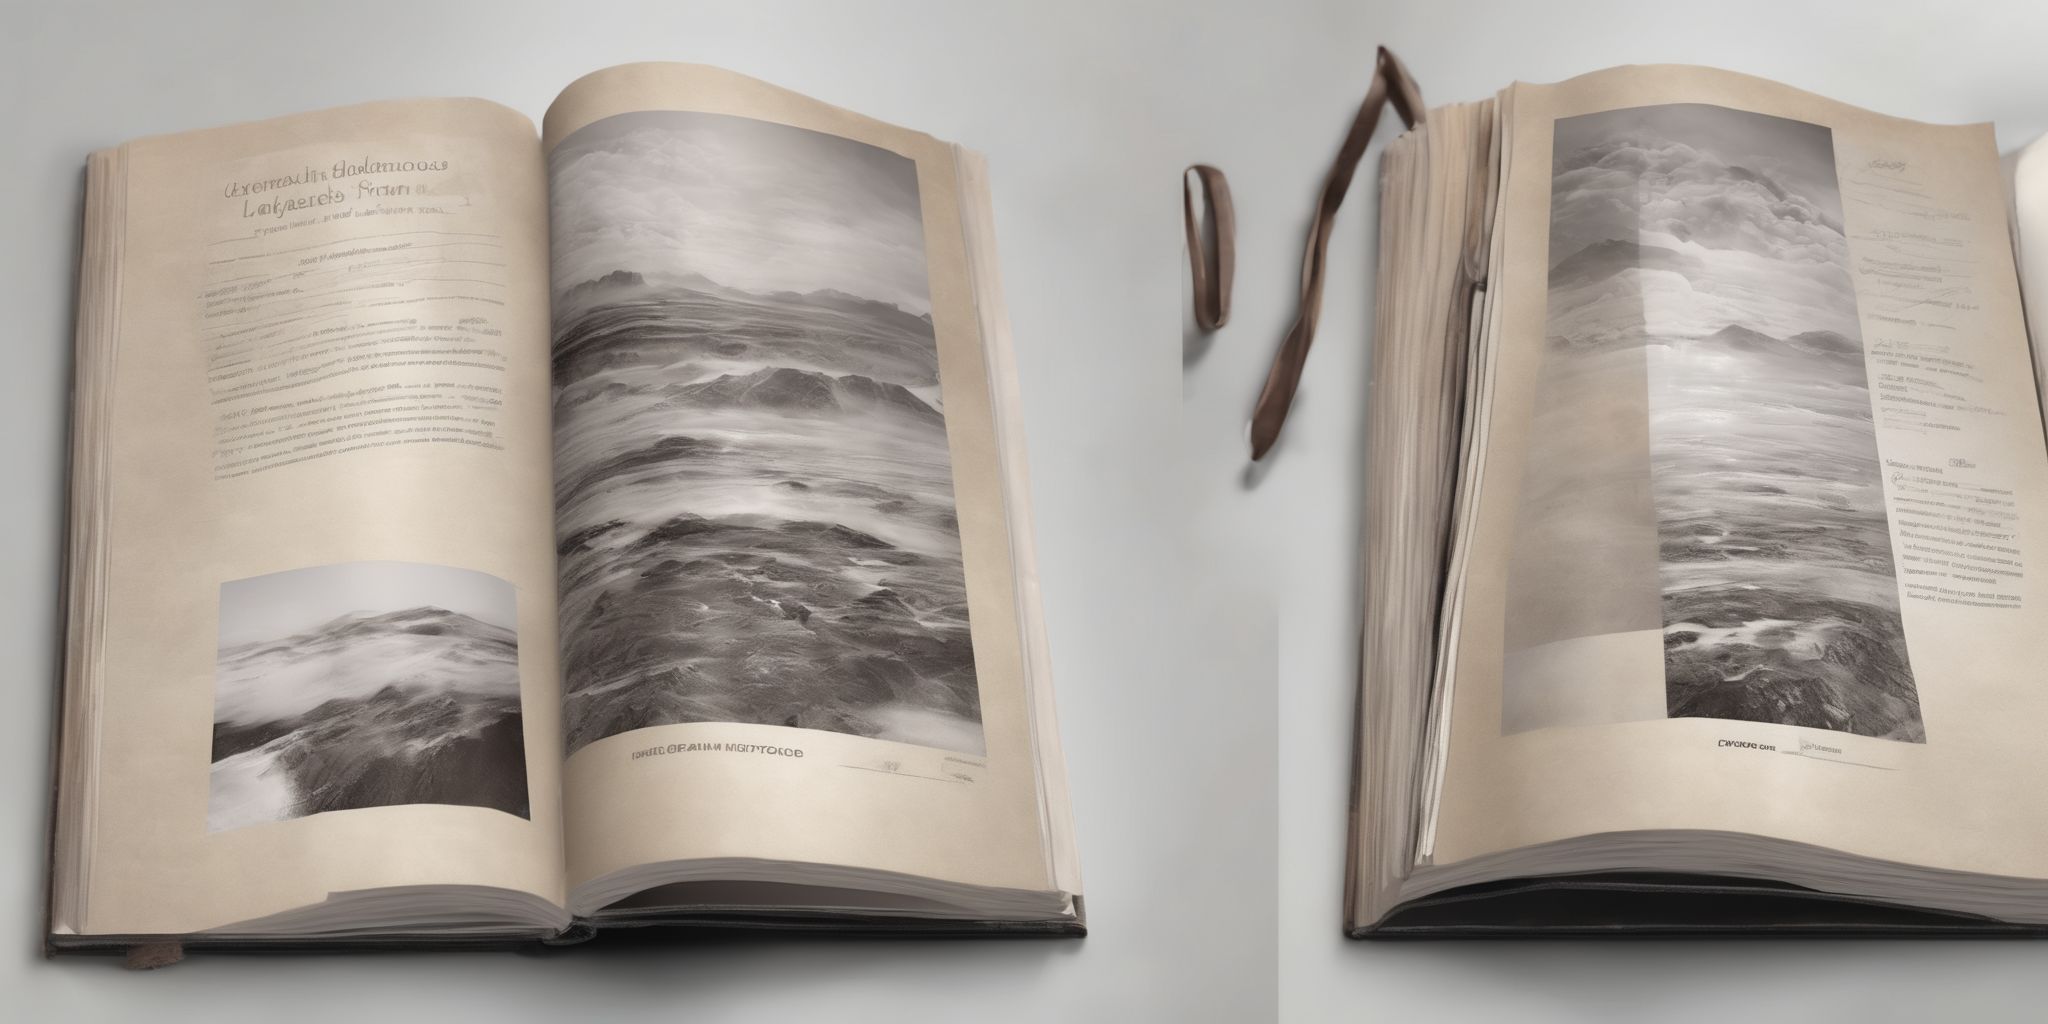 Handbook  in realistic, photographic style